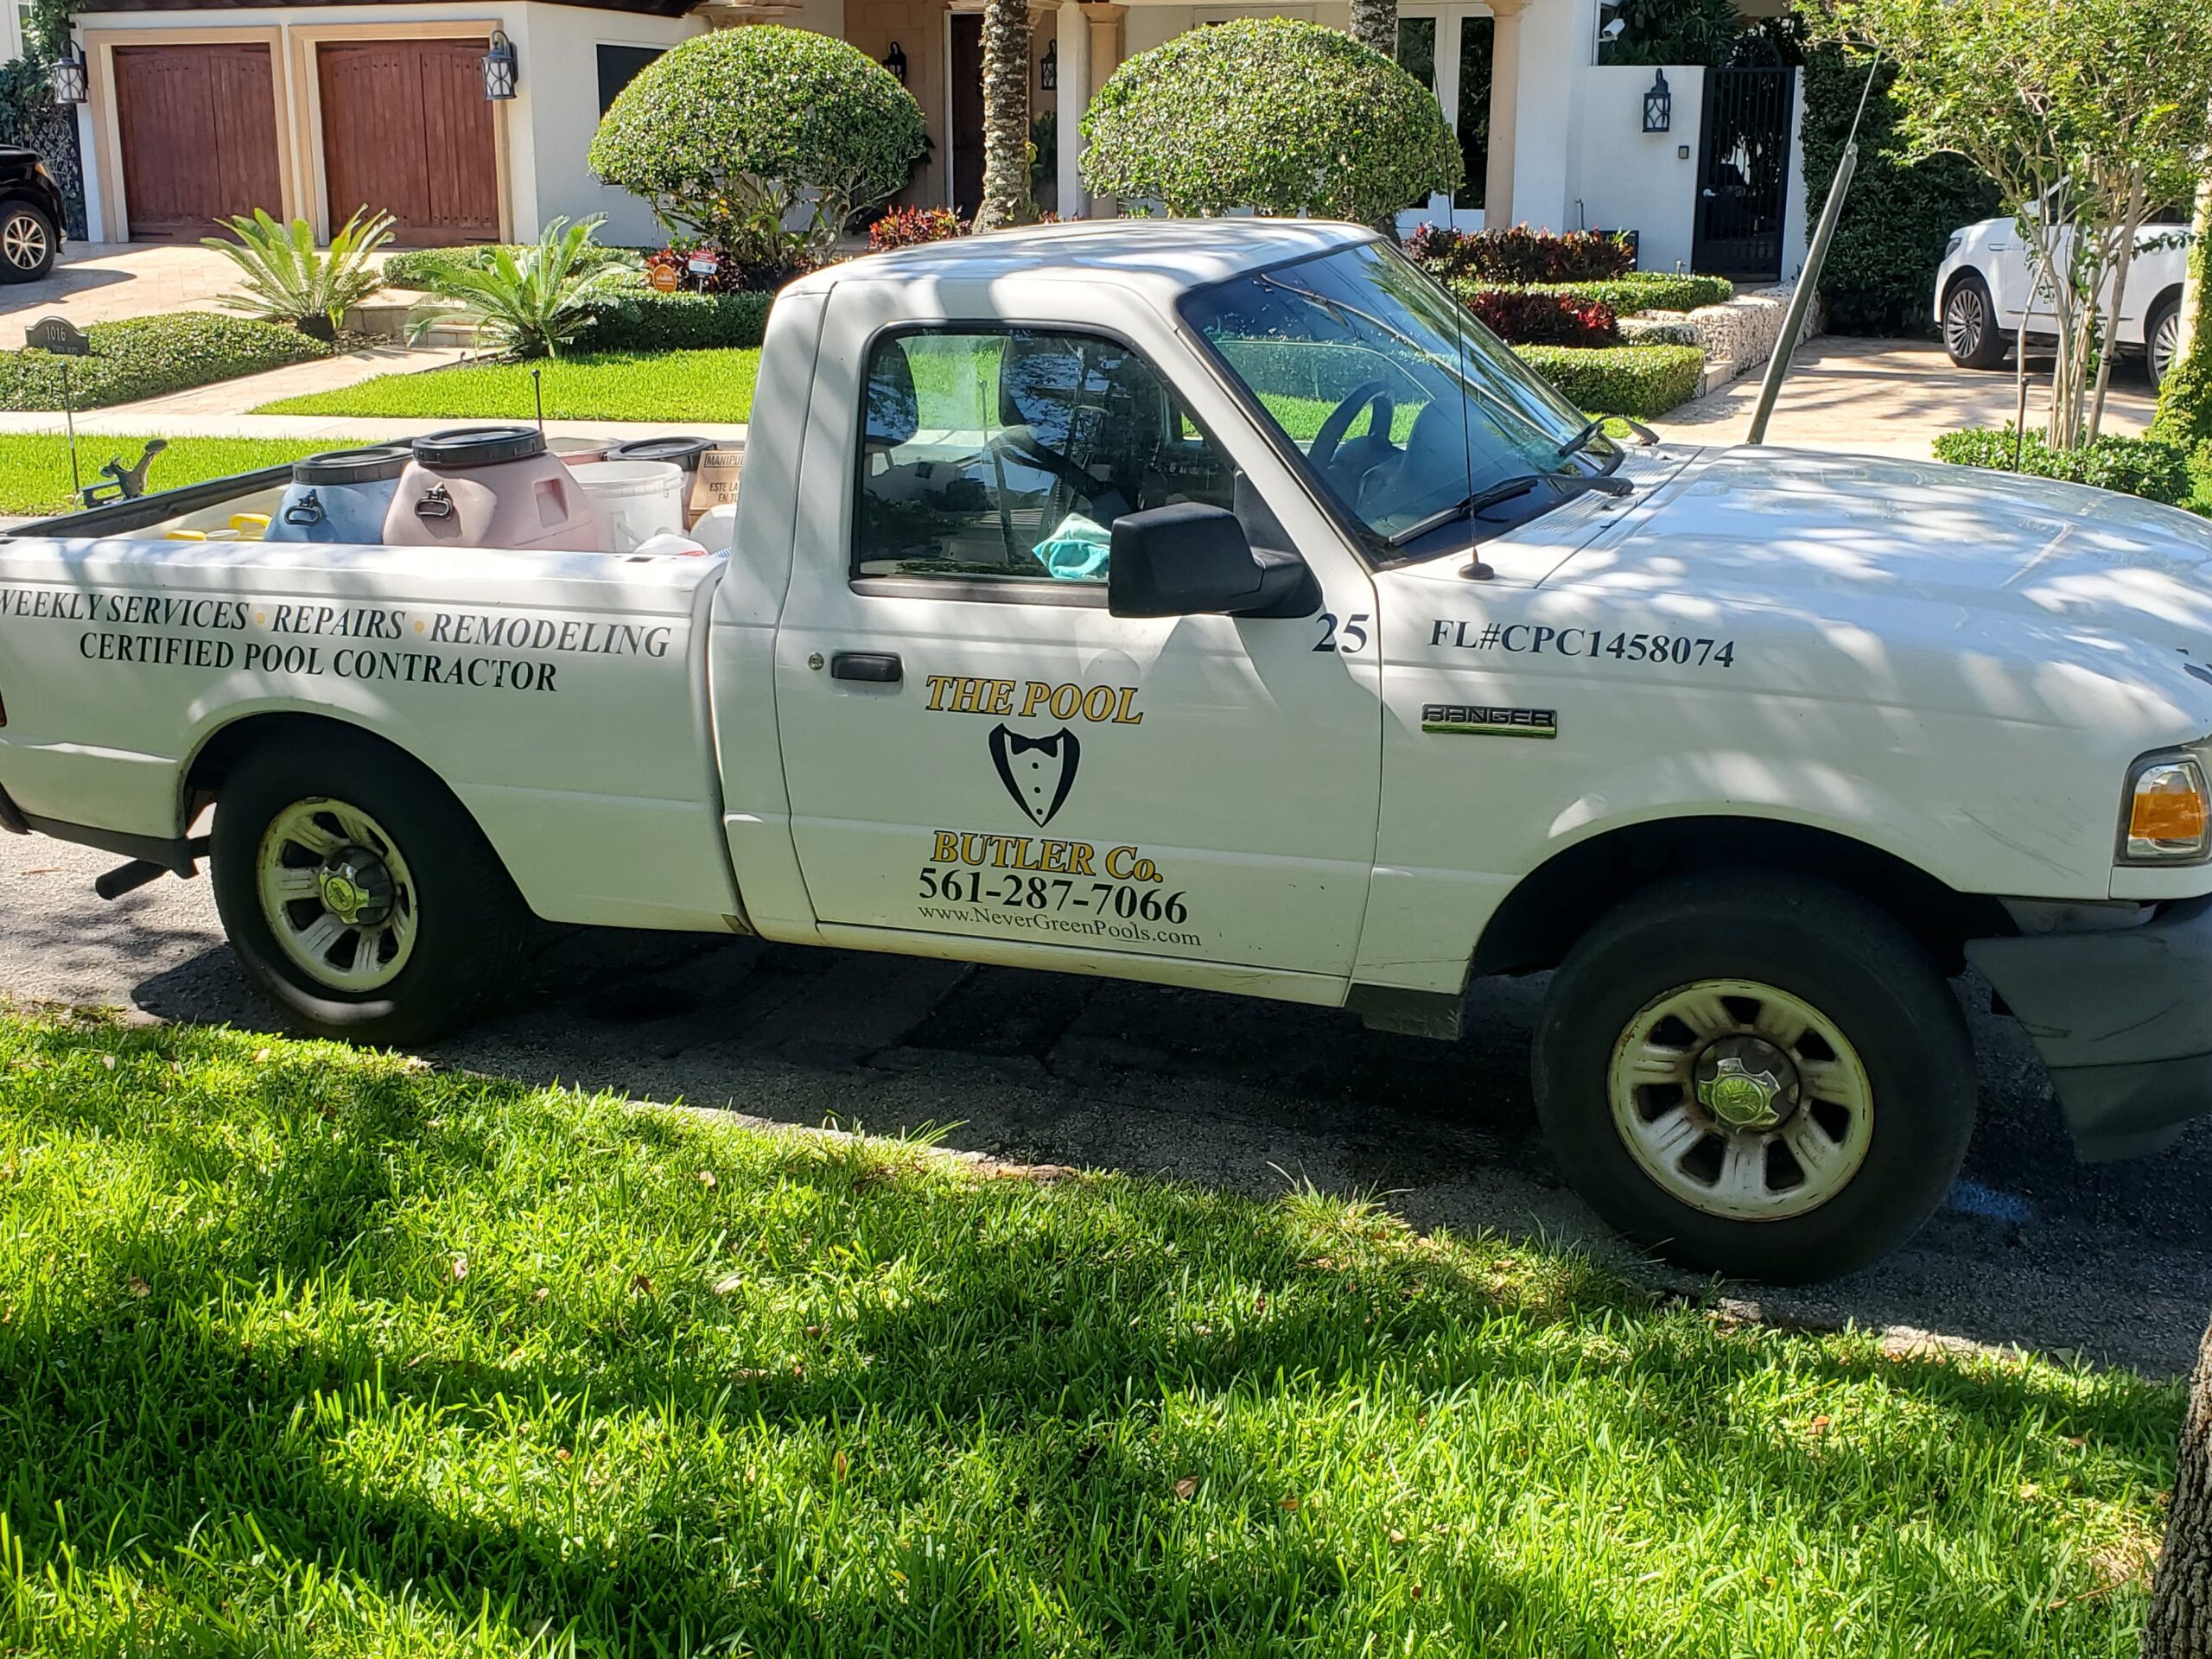 pool cleaning service truck ft lauderdale